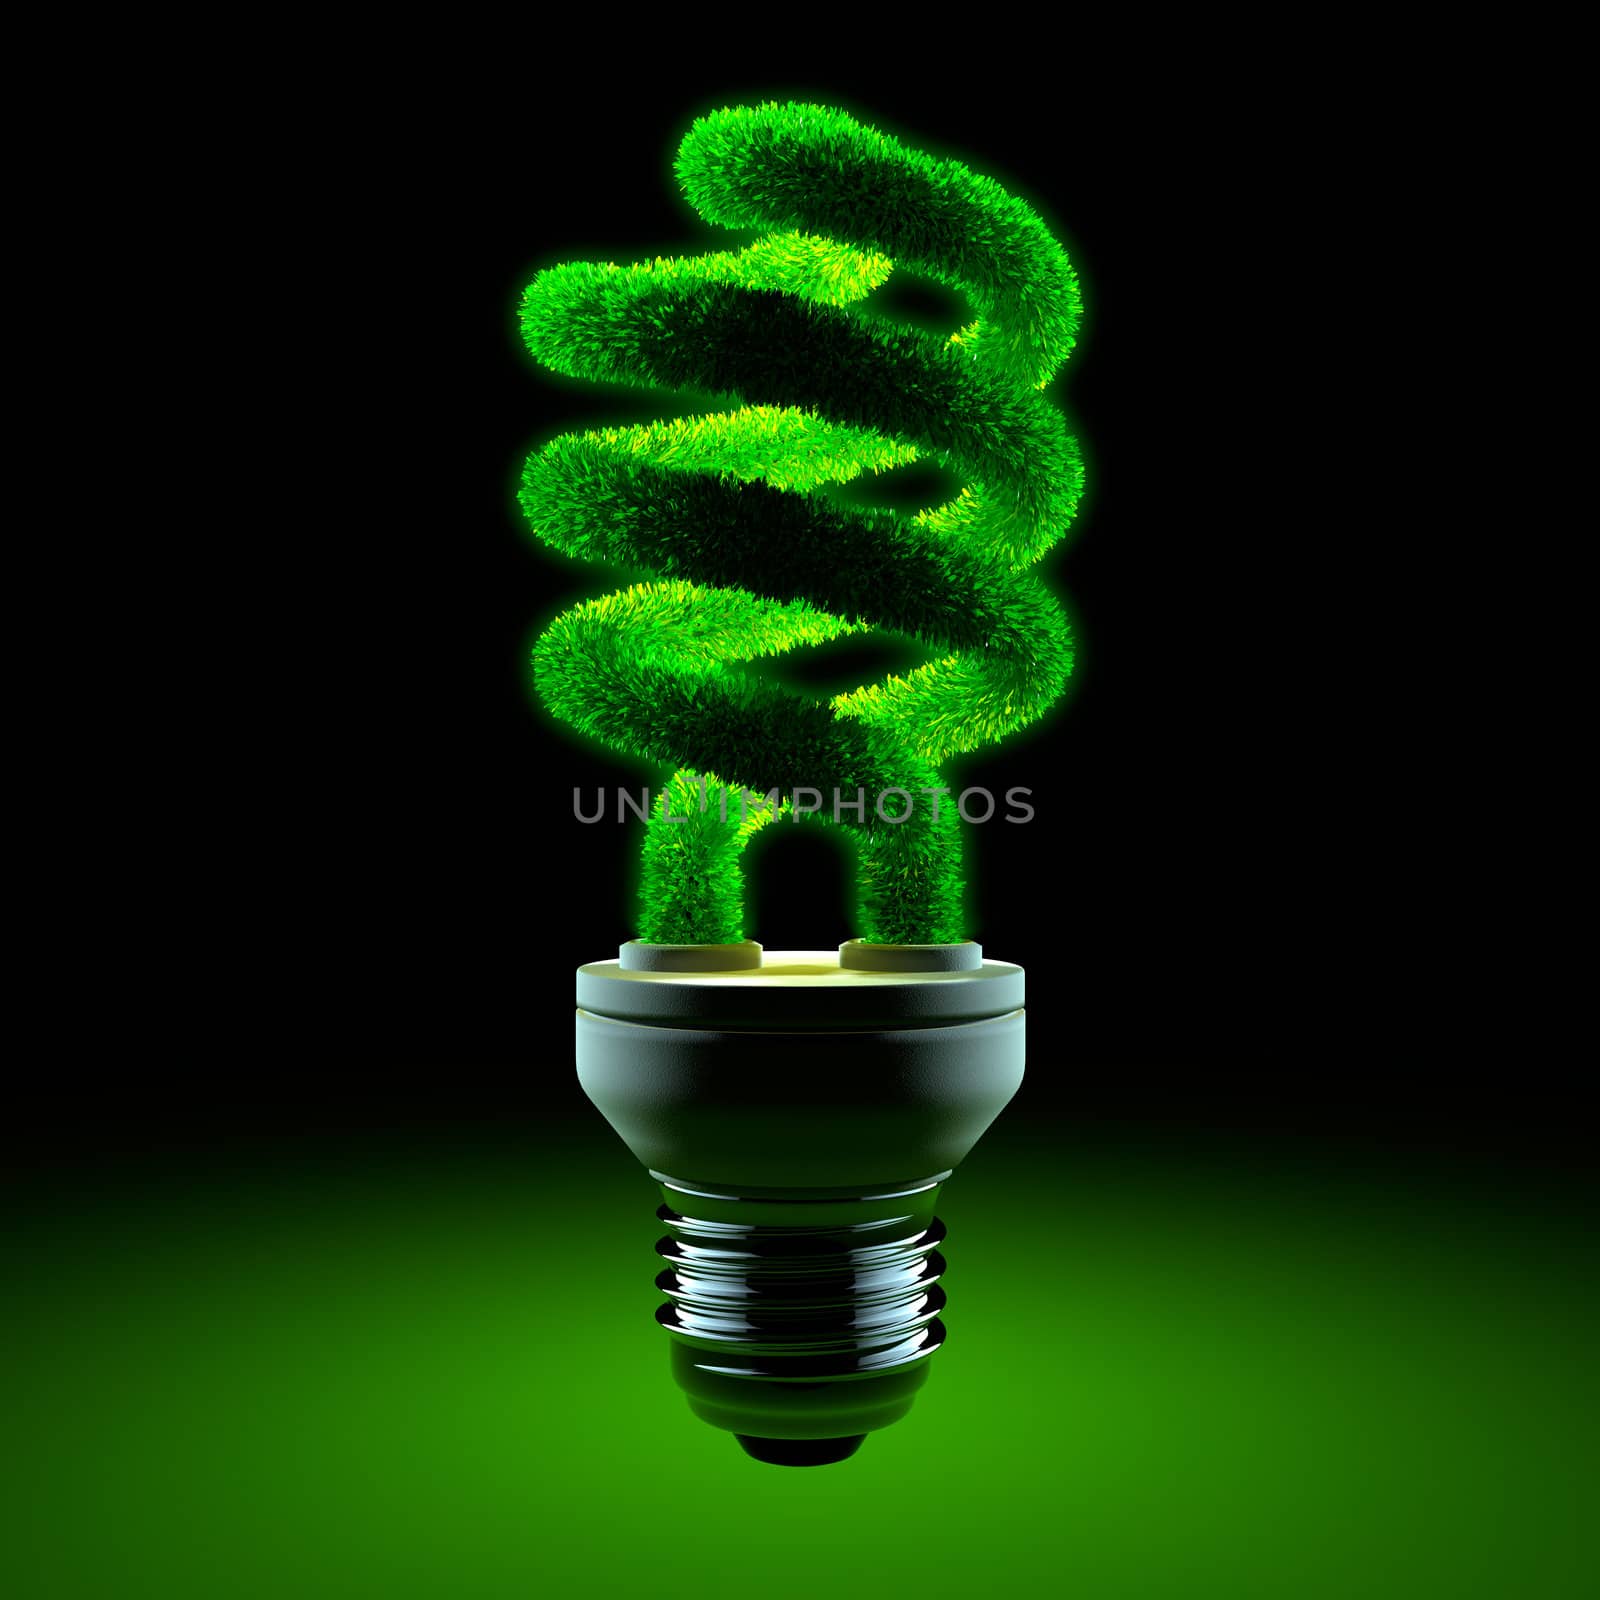 The metaphor of energy saving lamps - glass twisted tube is covered with grass, and shining in the darkness